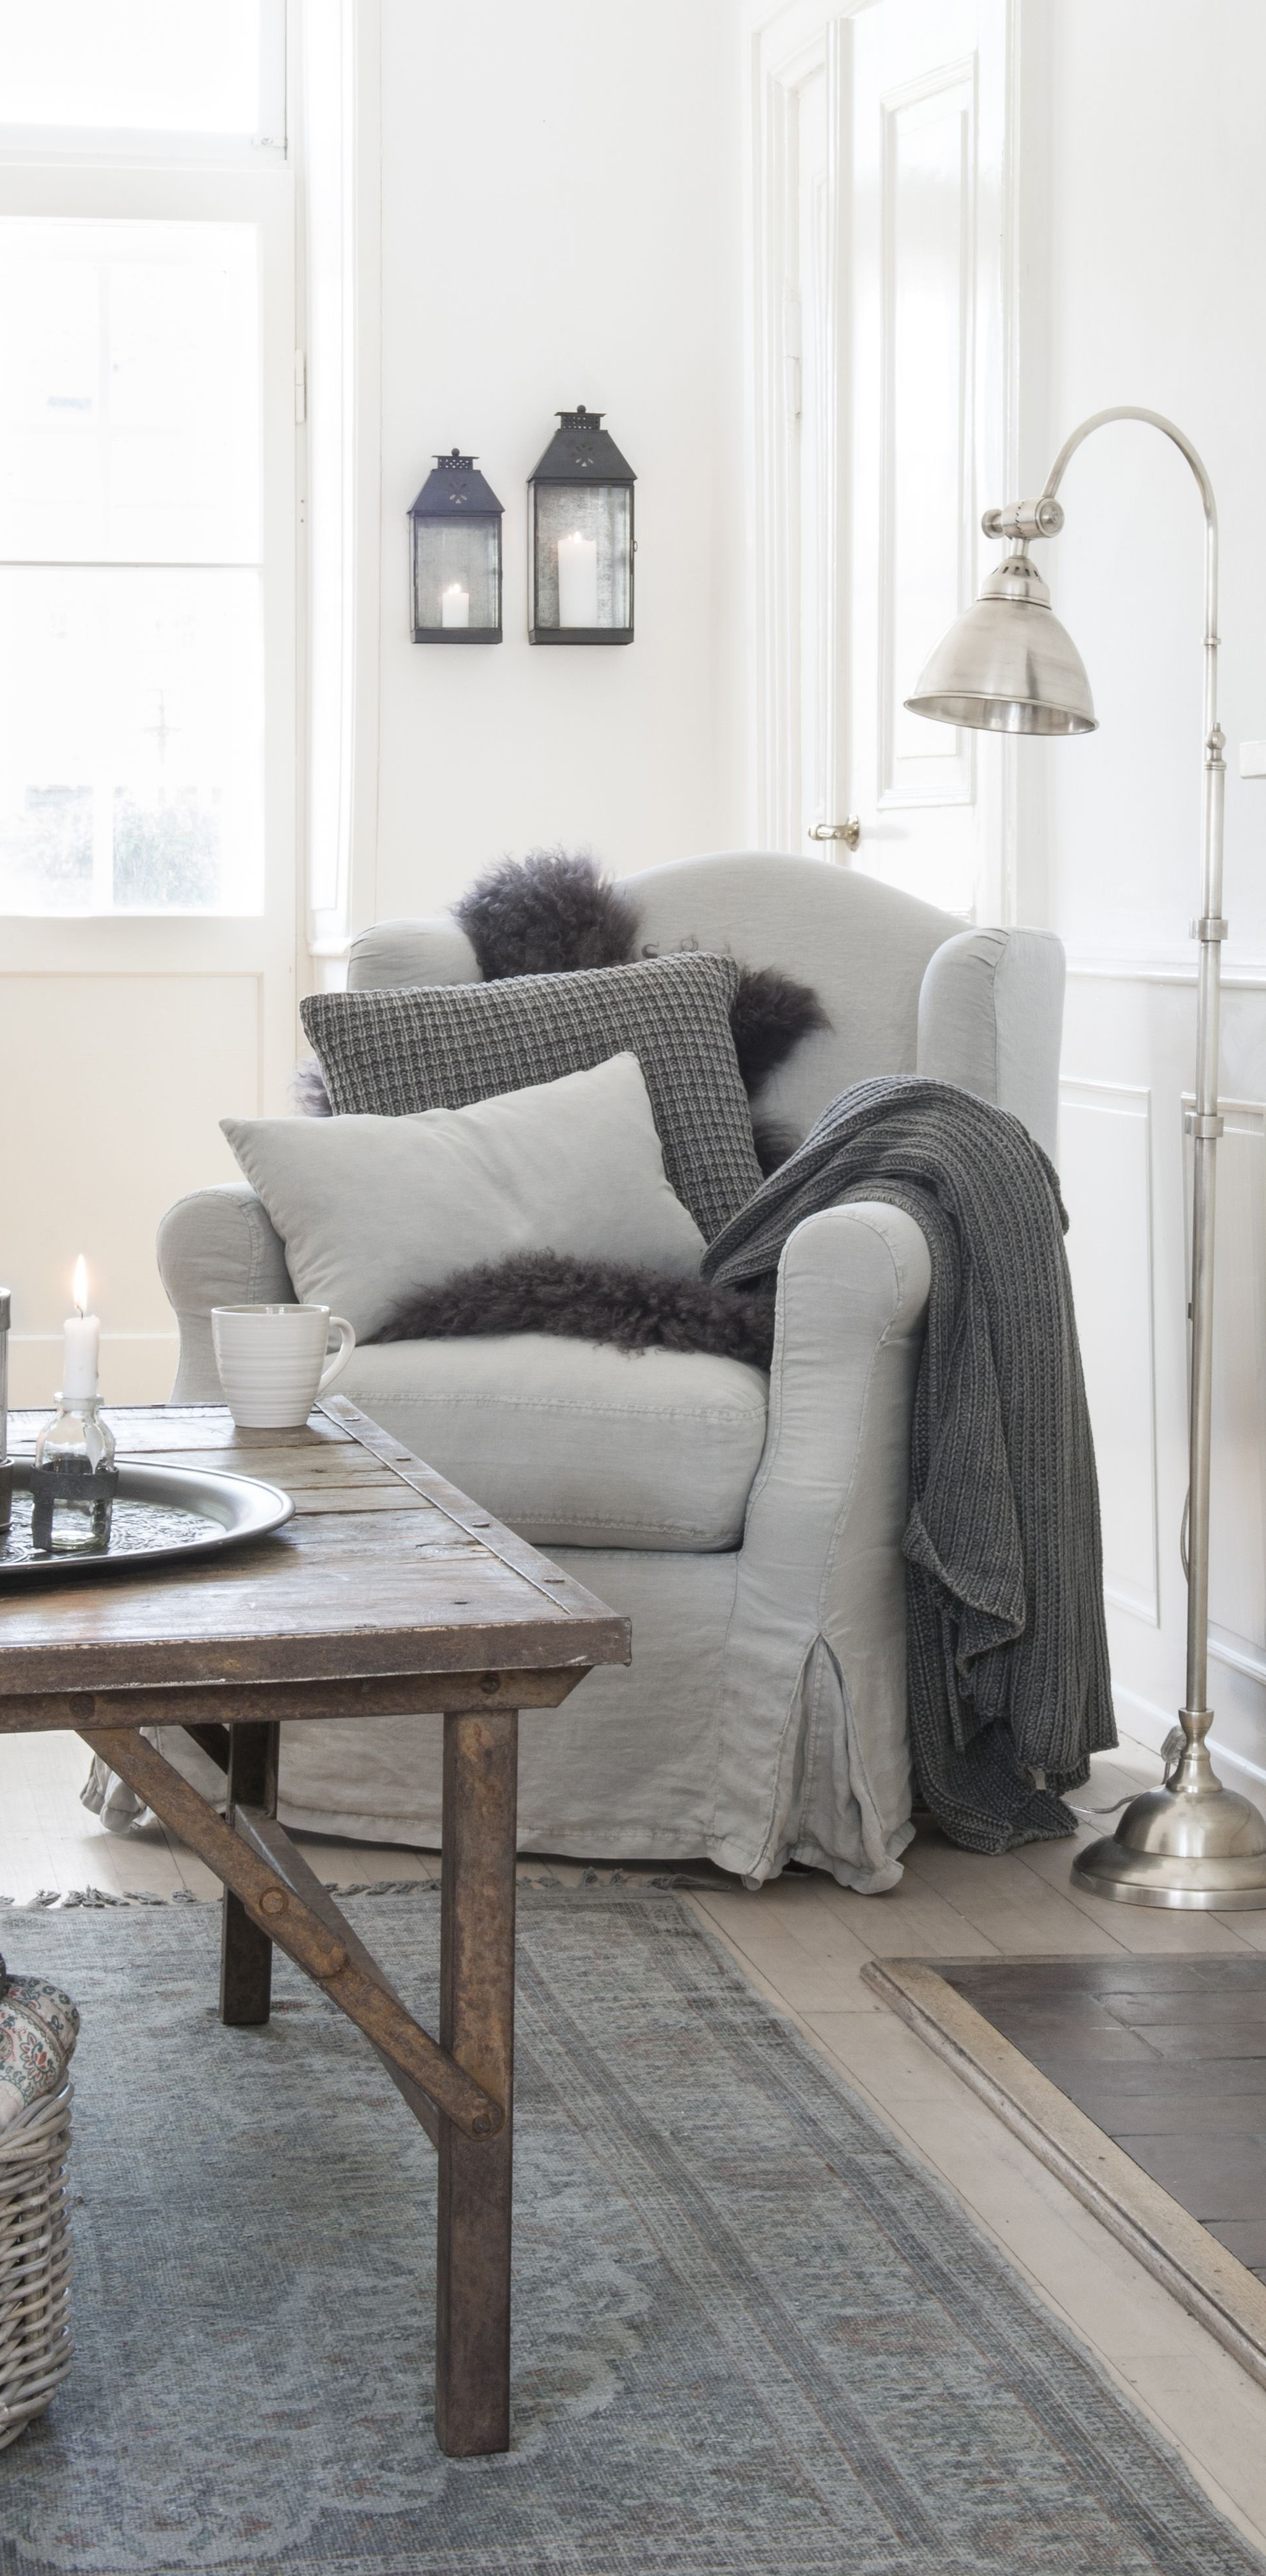 White Sitting Room With Gray Furniture Throw Blankets